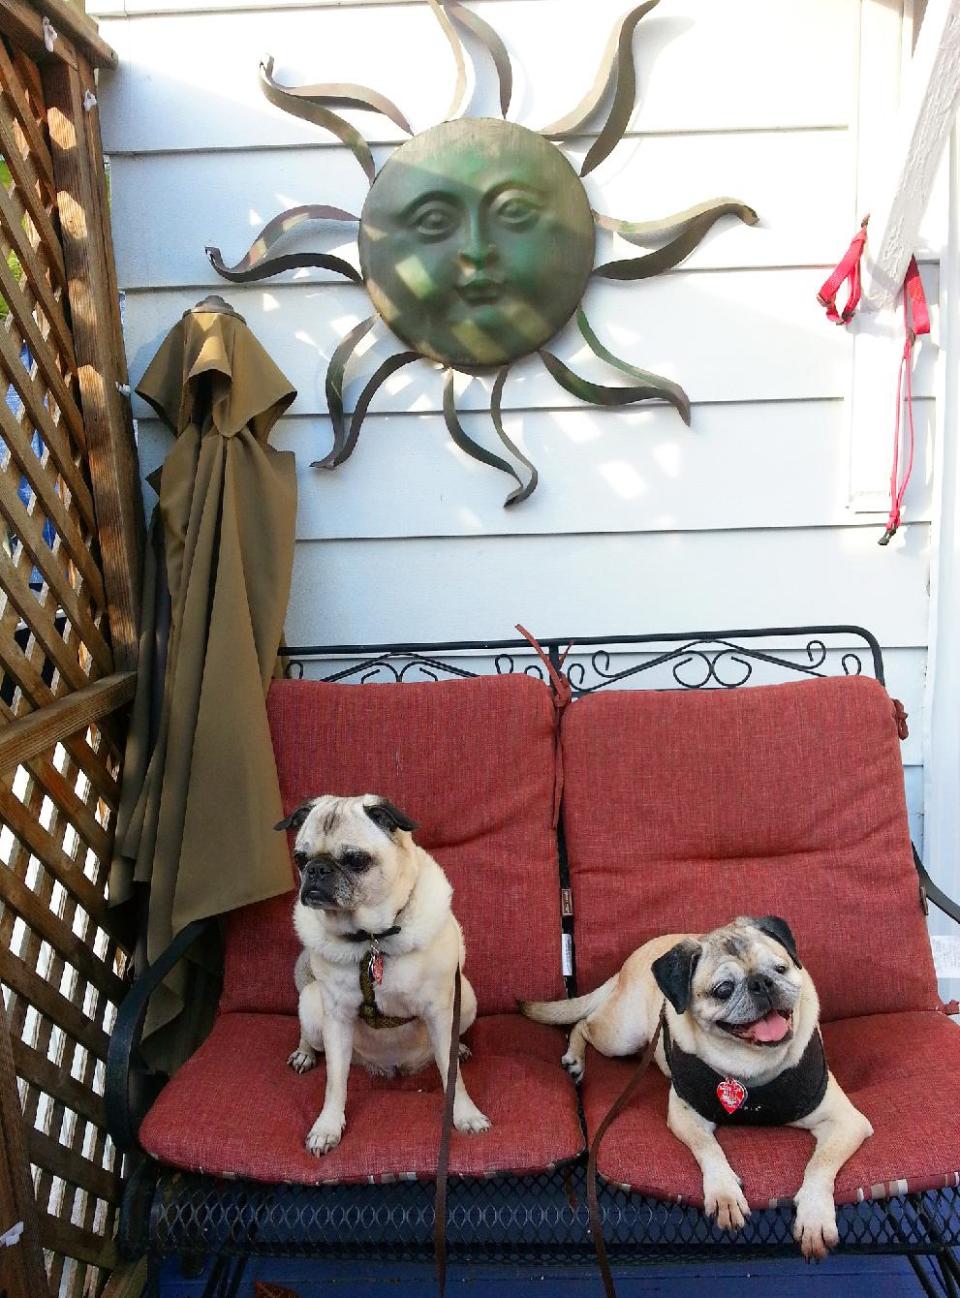 This June 2013 photo shows visiting pugs seated on the porch of the Bewitched & BEDazzled B&B, a dog-friendly inn in Rehoboth Beach, Del. Although dogs are not permitted on the beach or boardwalk May 1-Sept. 30, Rehoboth Beach is a dog-friendly destination, with various businesses offering accommodations and treats for pets. (AP Photo/Linda Lombardi)